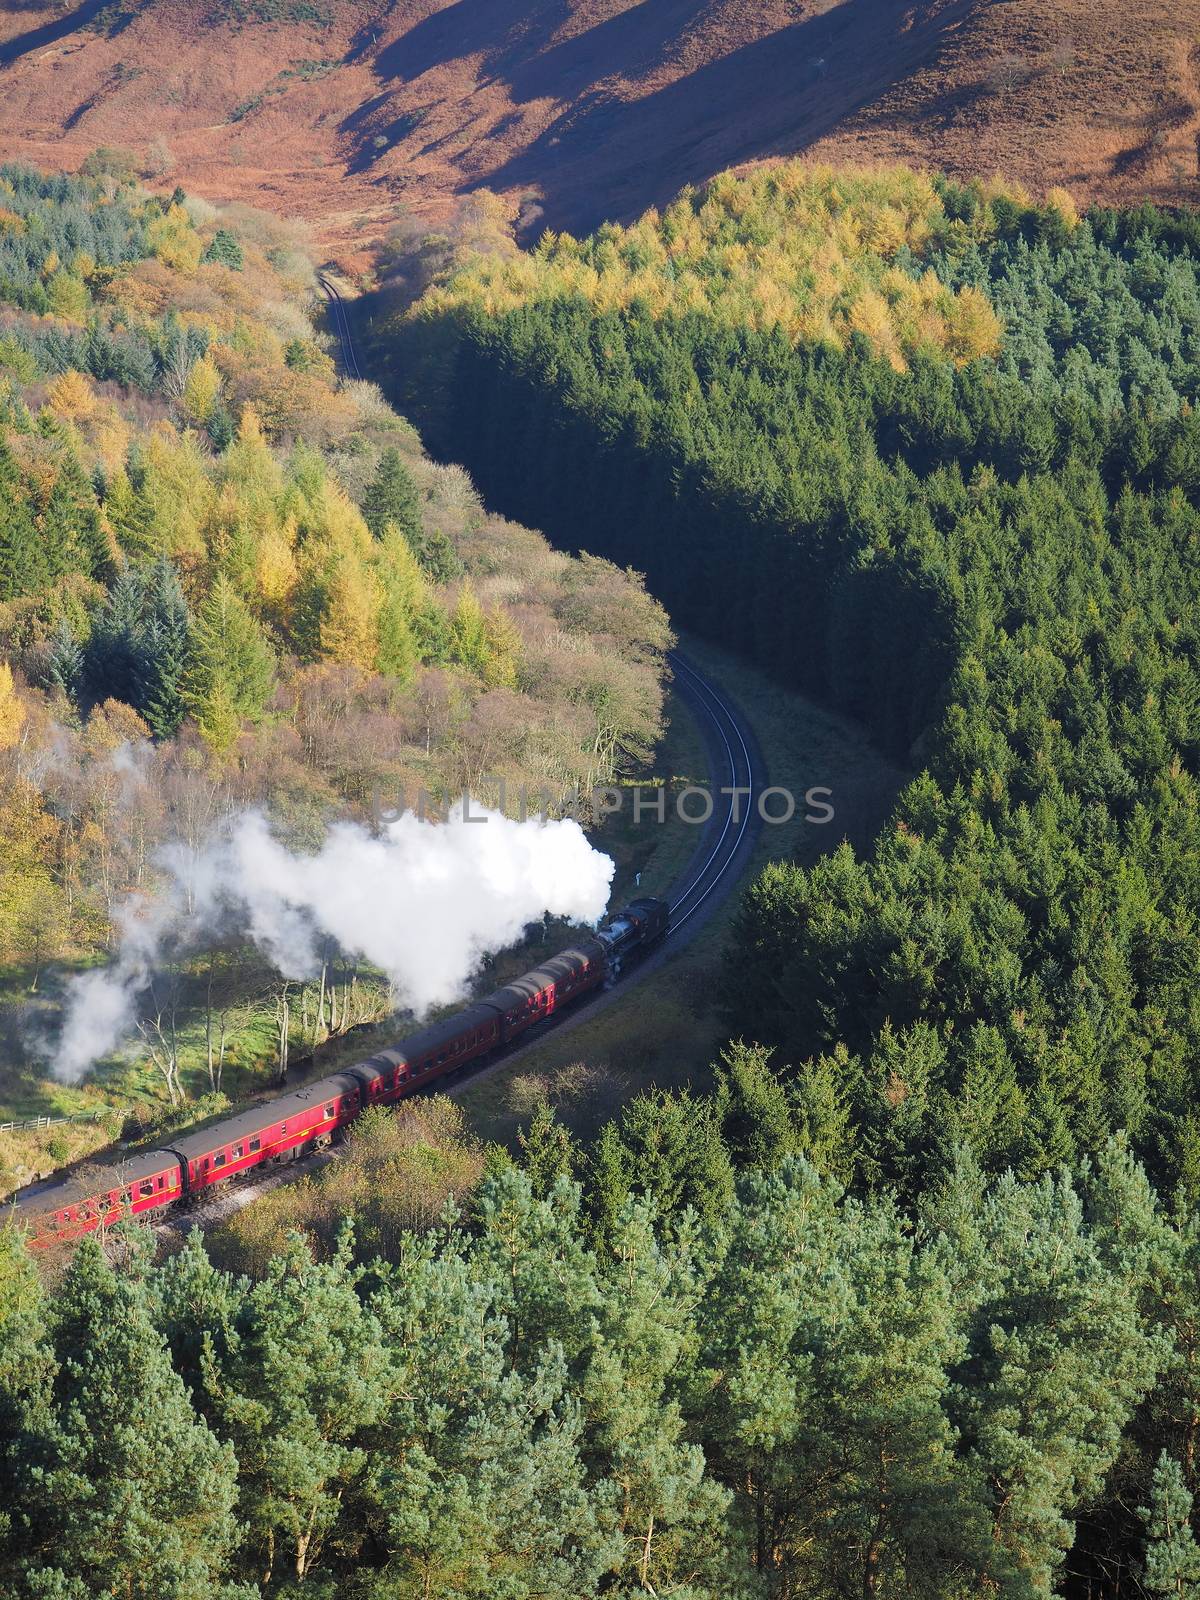 Railway with steam train winding its way through a wooded valley in Newtondale Forest, as seen from Skelton Tower, North York Moors National Park, Yorkshire, UK